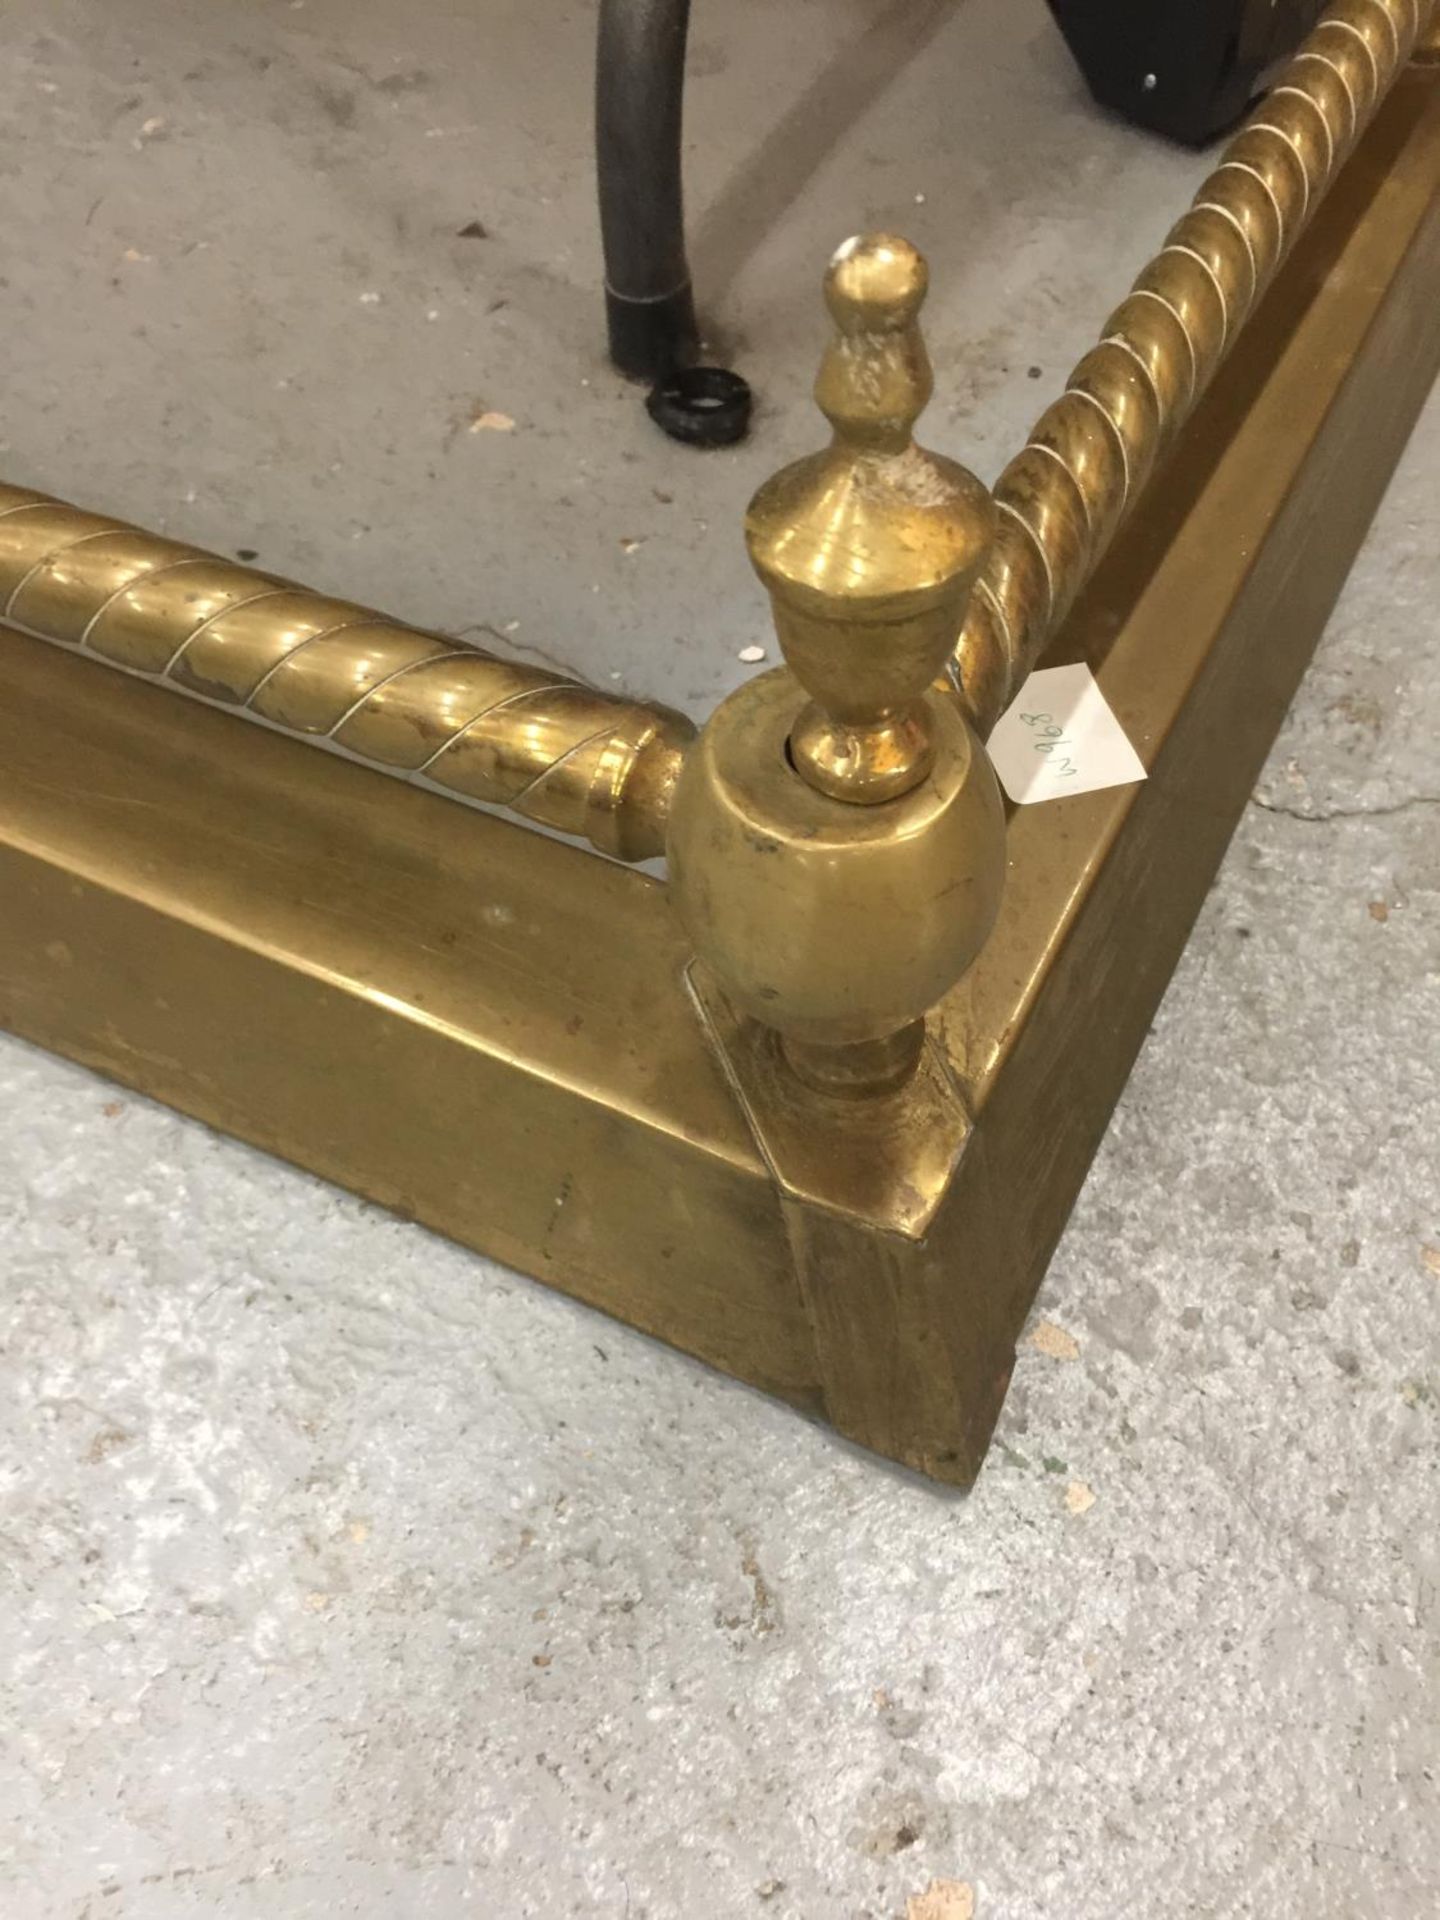 A SUBSTANTIAL BRASS FIRE FENDER - Image 2 of 3